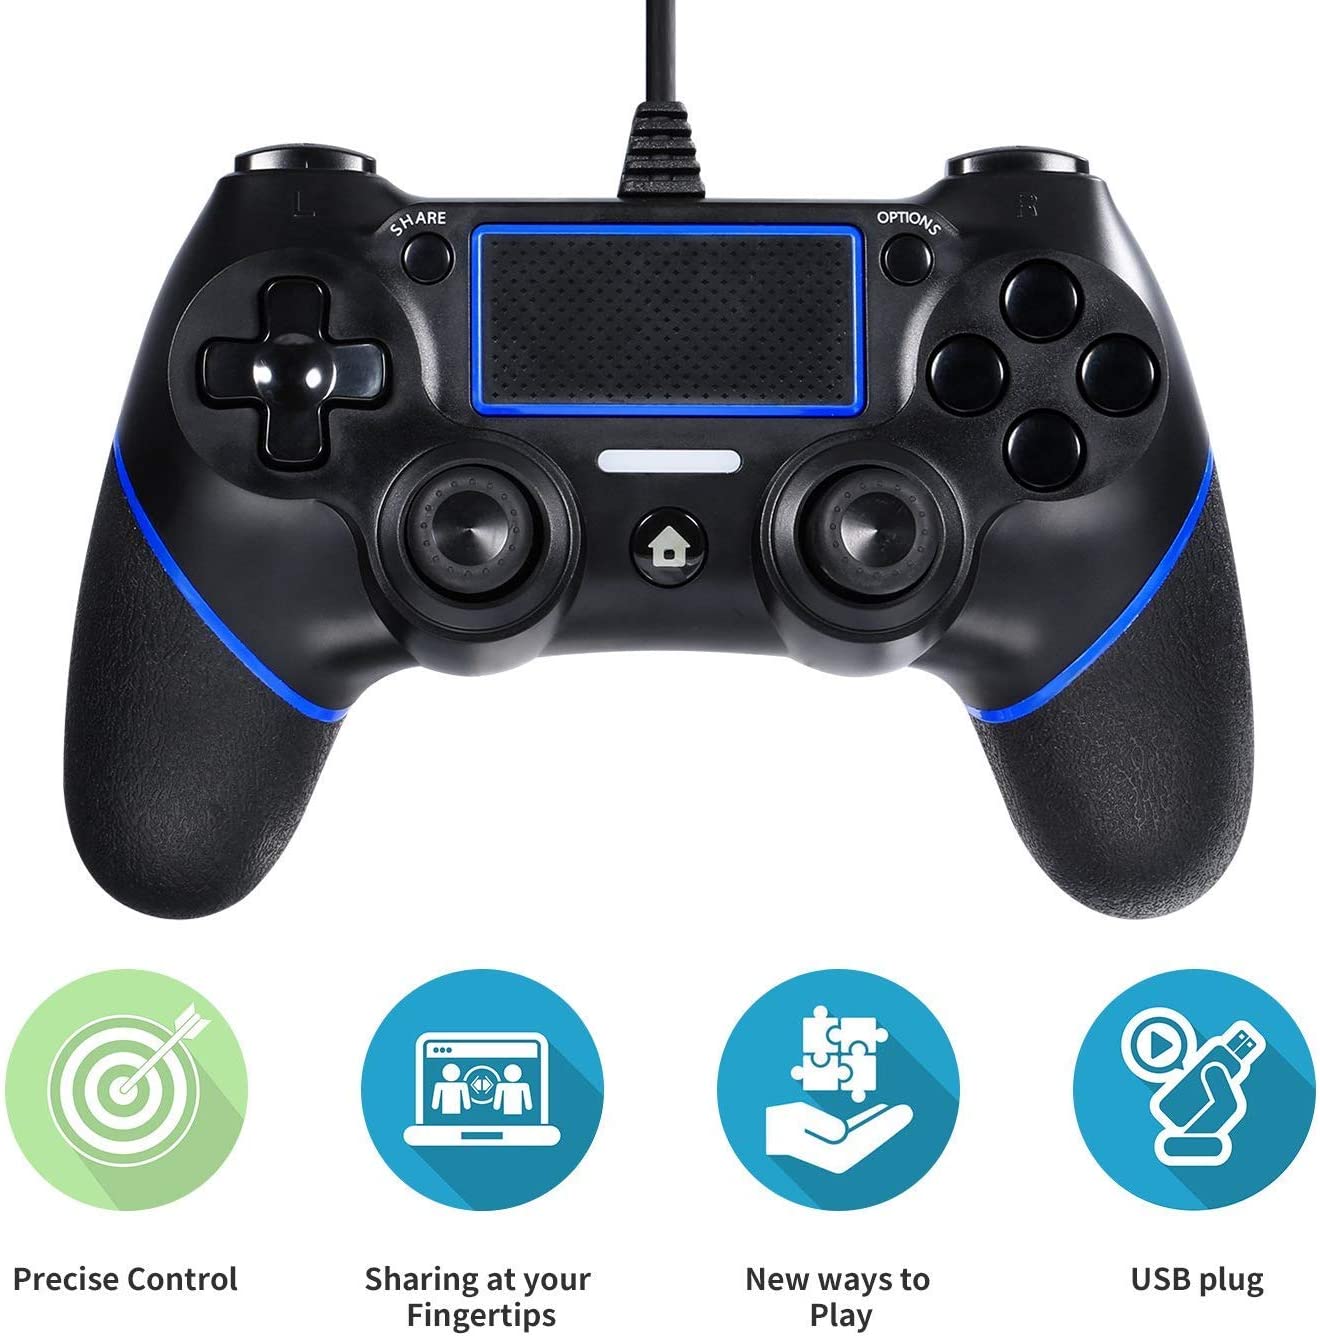 Wired Controller for Playstation 4, Professional USB PS4 Wired